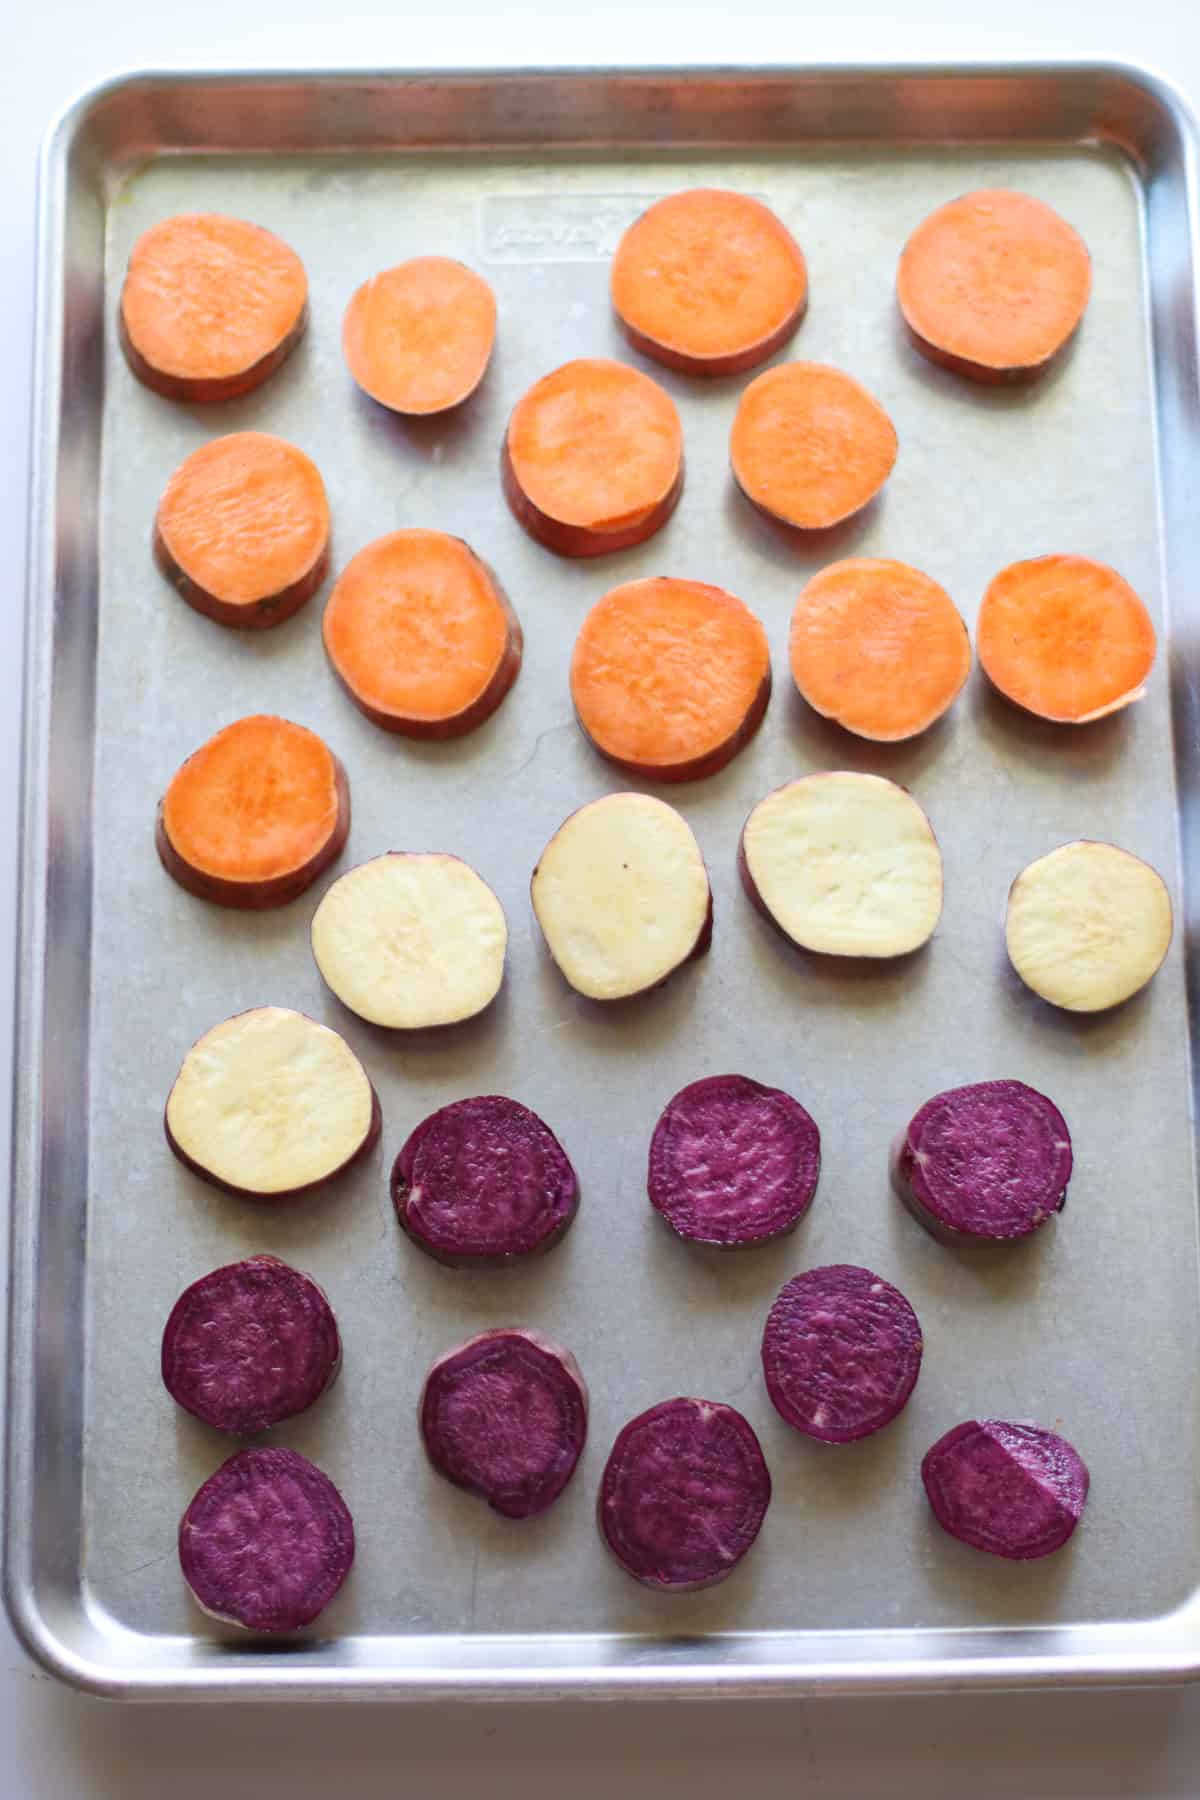 Sliced purple, orange, and white colored sweet potatoes placed on a sheet pan.